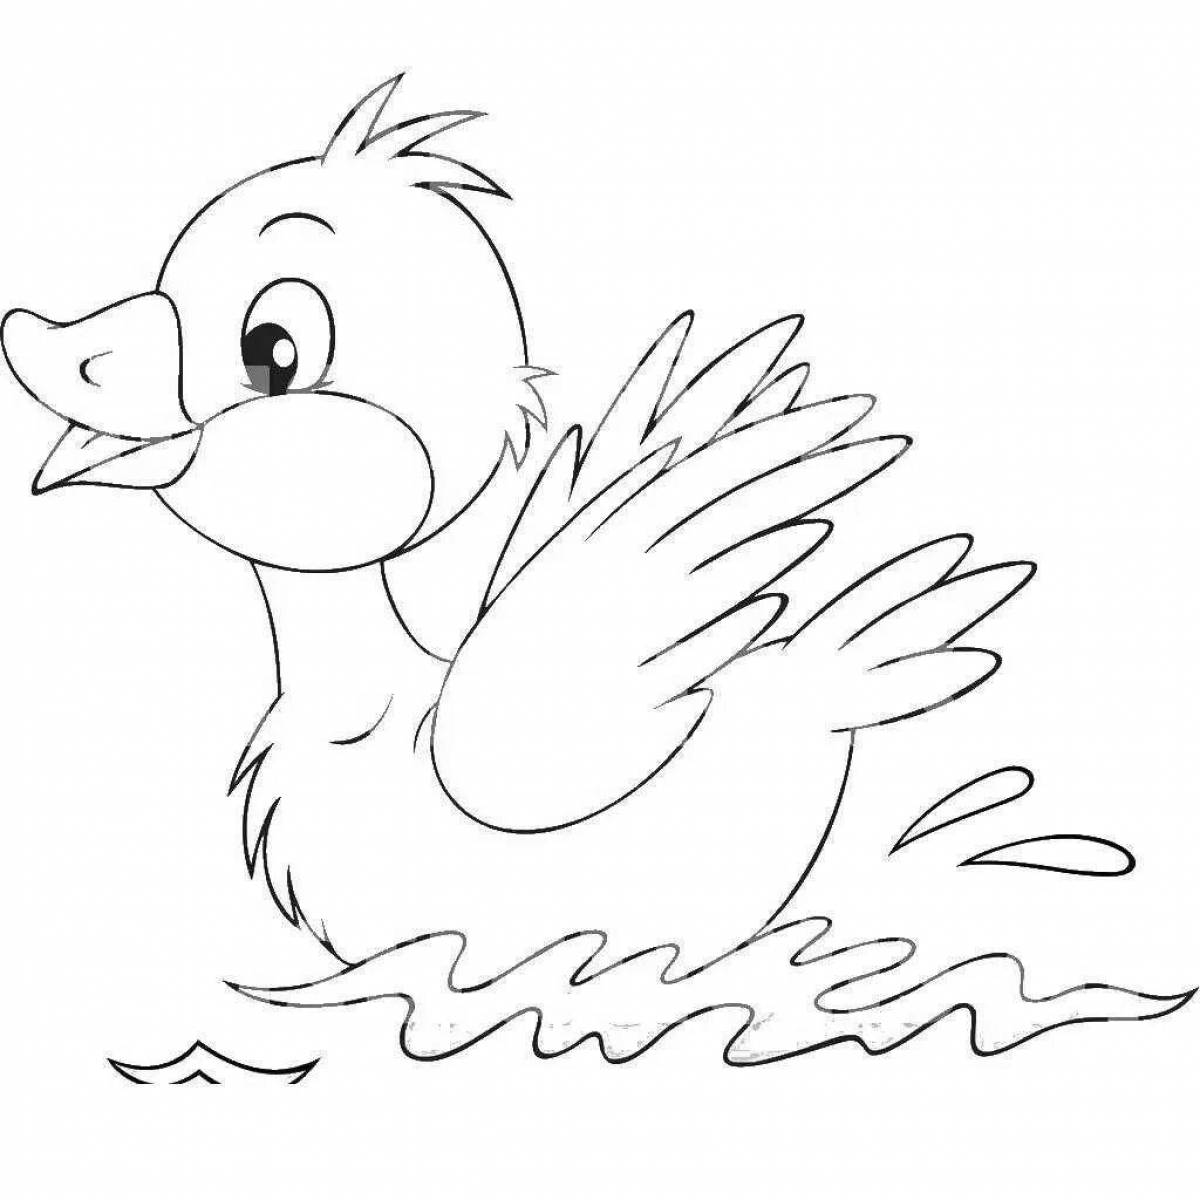 Ugly duckling with crazy color coloring book for kids